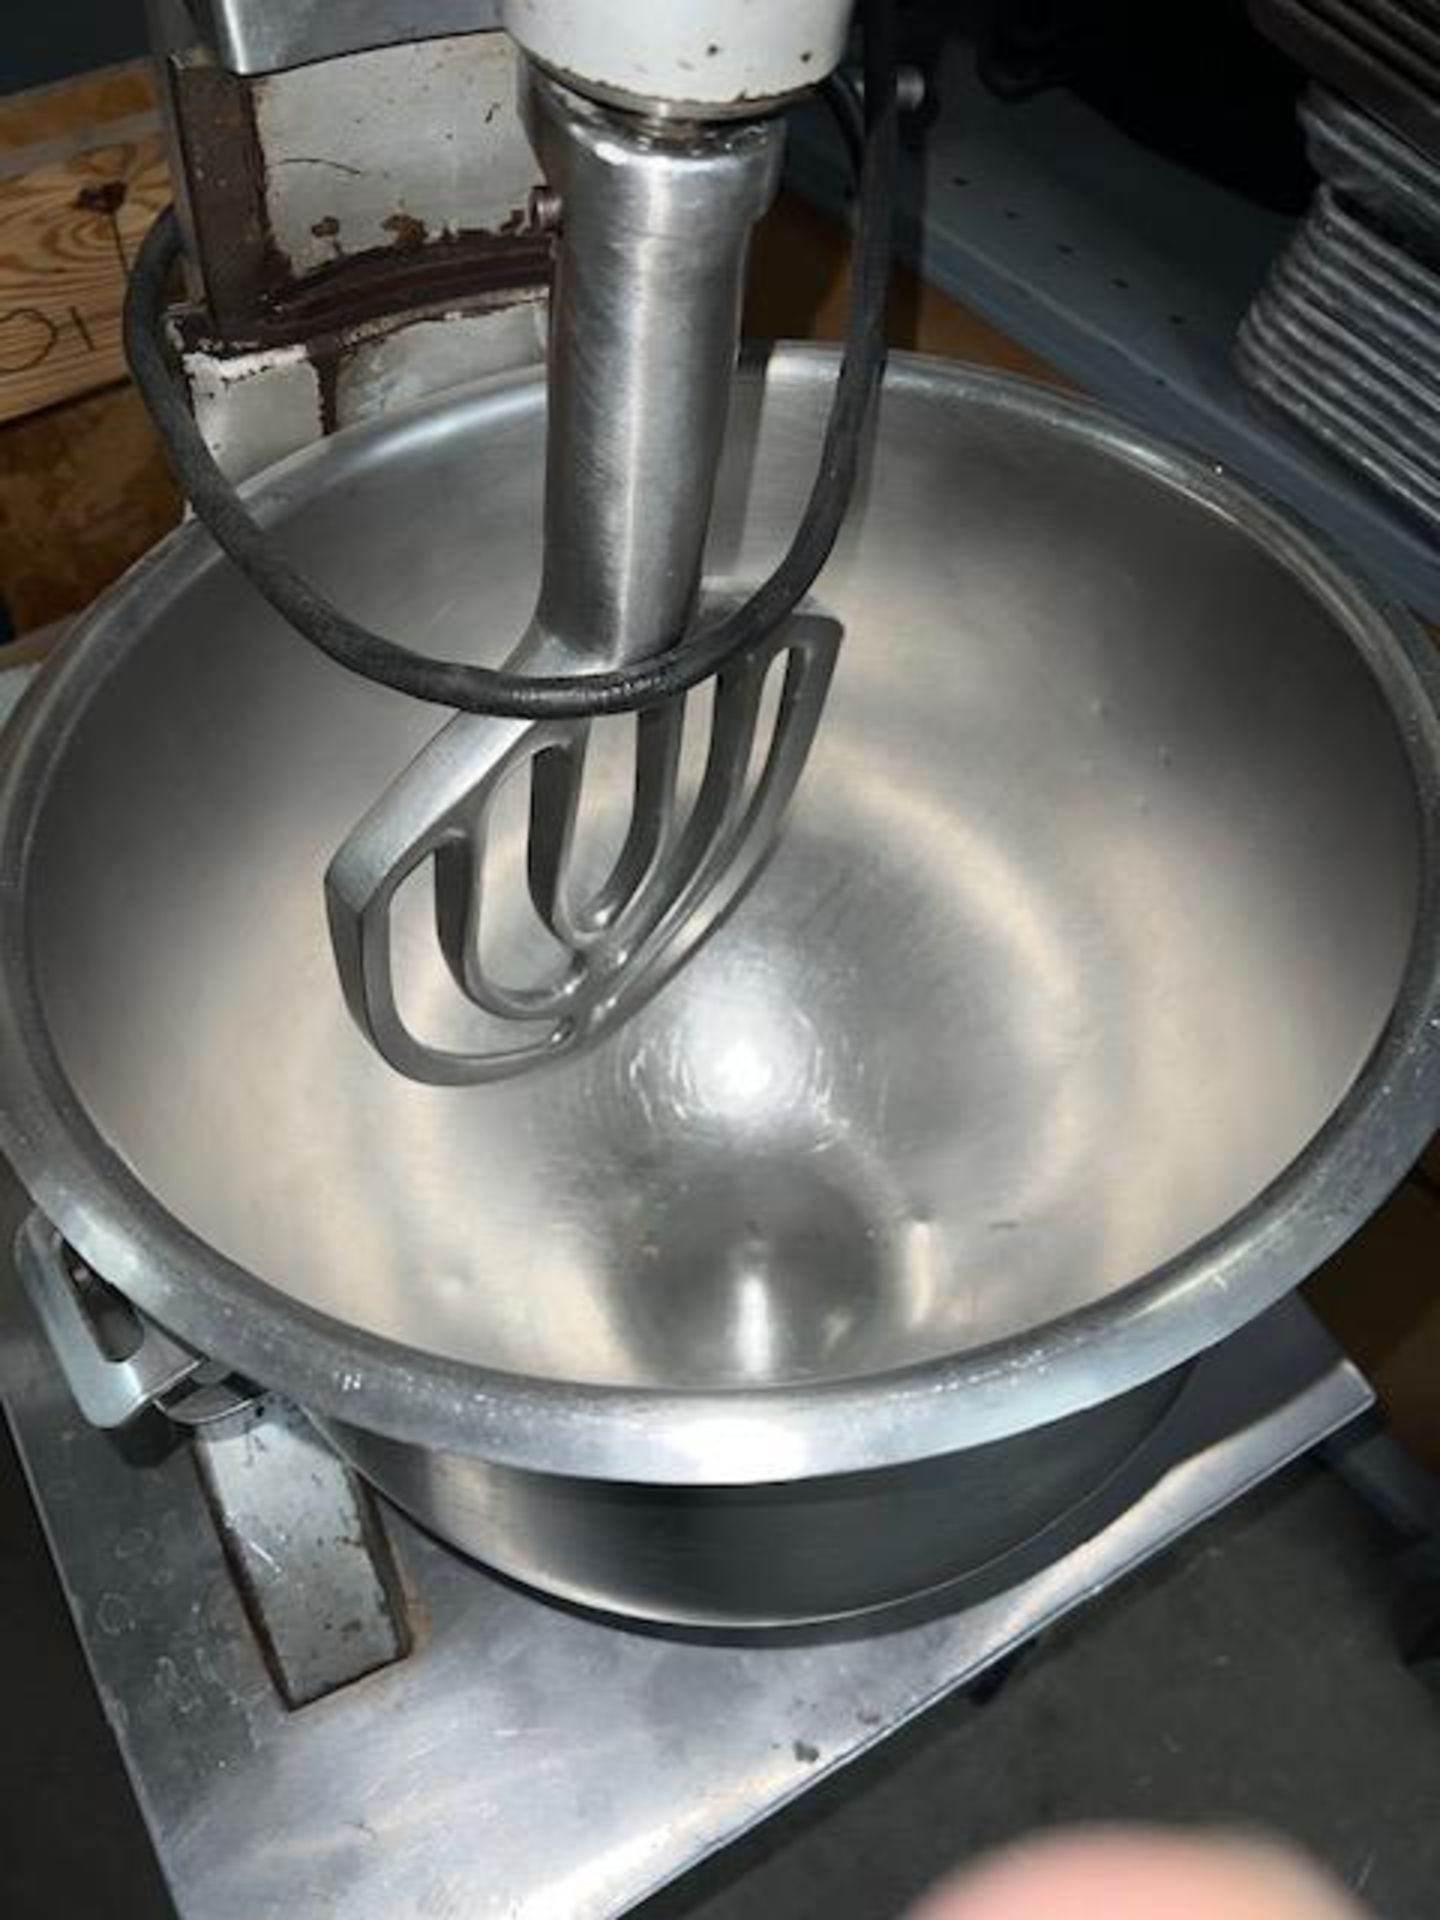 Asset 245 - Hobart 20 quart Mixer, Model A200 with stainless steel bowl and flat beater, 3 speed, - Image 3 of 5